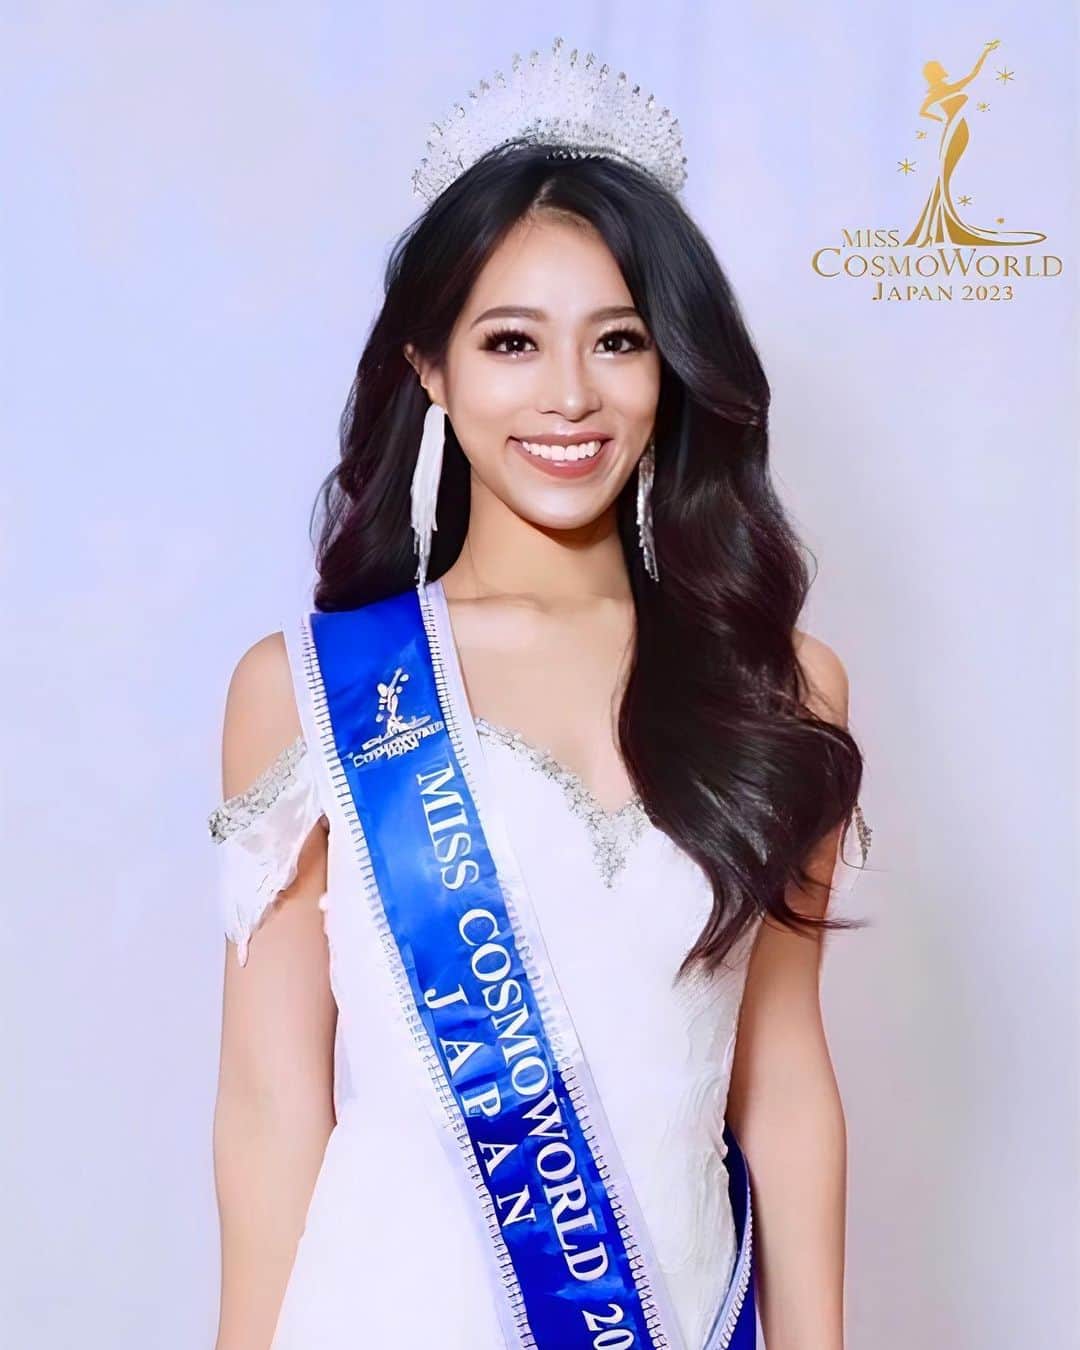 絹野志朋さんのインスタグラム写真 - (絹野志朋Instagram)「Repost from @misscosmoworld  . 🌸Official Announcement🌸  2023 Miss Cosmo World Japan is Shiho Kinuno. @shihok0414 Congratulations🎉🎉  Shiho Kinuno, the Japanese representative for the Miss Cosmo World world competition in Malaysia.  Shiho is a graduate of Kobe University and has a strong command of English. She recently stayed in Cebu Island for a short study program to further improve her language skills. Shiho is a dynamic and outgoing individual who loves connecting with people and exudes positive energy.  We kindly request your support and encouragement for her participation in the competition. With your help, we believe Shiho can represent Japan with pride on the global stage.  Thank you for your ongoing support. To @misscosmoworld family and Founder of Miss Cosmo World @carrielee1212 Thank you for giving her special opportunity.  2023 ミスコスモワールド日本代表の栄冠に輝いたのは 絹野志朋さん✨おめでとうございます🎉  絹野さんは11月中旬からミスコスモワールド開催国マレーシアに滞在し、11月29日グランドファイナルのステージに立ちます。 絹野さんは神戸大学卒。高い英語力がありながら更なる自己研磨のため先日まで短期留学のためセブ島に滞在。 行動力があり、人と関わることが大好きなエネルギー溢れる女性です。皆様の応援をよろしくお願い致します🎊  Miss Cosmo World Japan @misscosmoworldjapan   Support team @japan_beauty_ambassador  Miss Cosmo World Japan National Director Founder of Japan Beauty Ambassador  @aya_kiyota . . #ミスコスモワールド #ミスコスモワールドジャパン #ミスコン日本代表#ミスコン世界大会 #ジャパンビューティーアンバサダー # 絹野志朋 #モデル #リポーター #神戸大学 #富山#マレーシア#マレーシア観光 #misscosmoworld #misscosmoworldjapan #beautypageant #malaysia #japan #k| #osaka #kobe #kobeuniversity #challenge #passion」10月25日 19時04分 - shihok0414